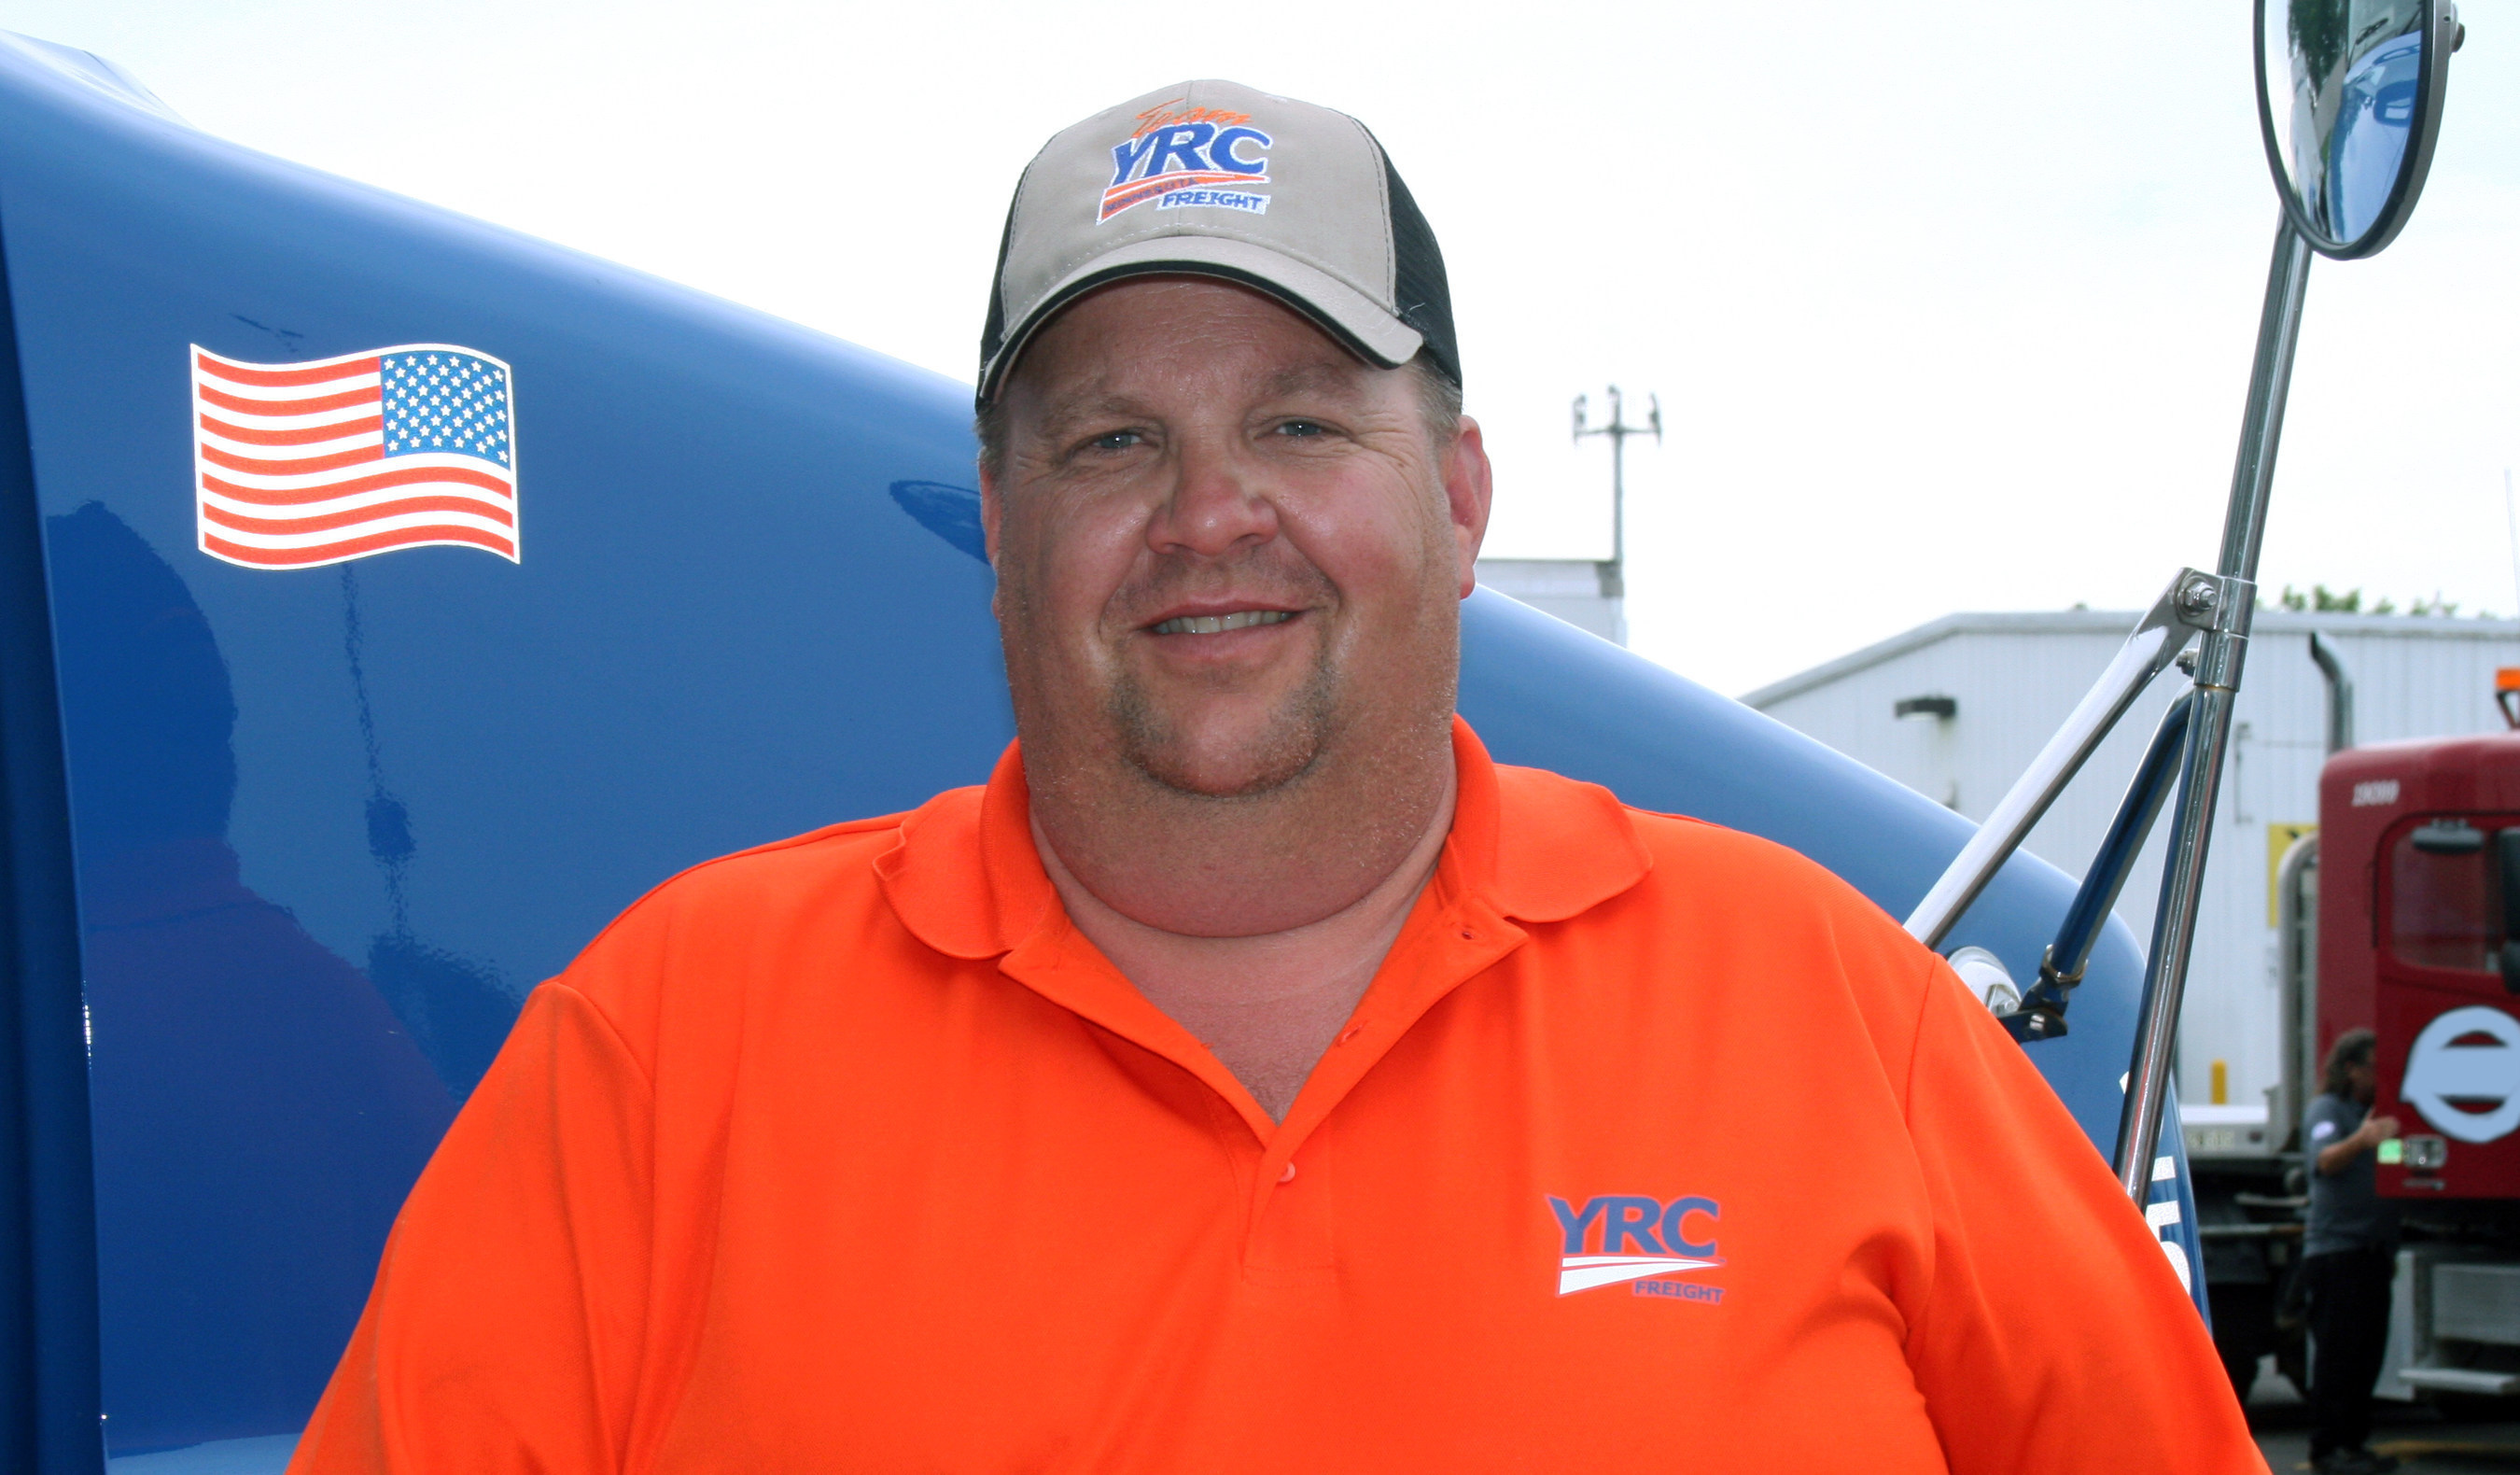 Bill Krouse of YRC Freight is named Minnesota's 2014 Driver of the Year.